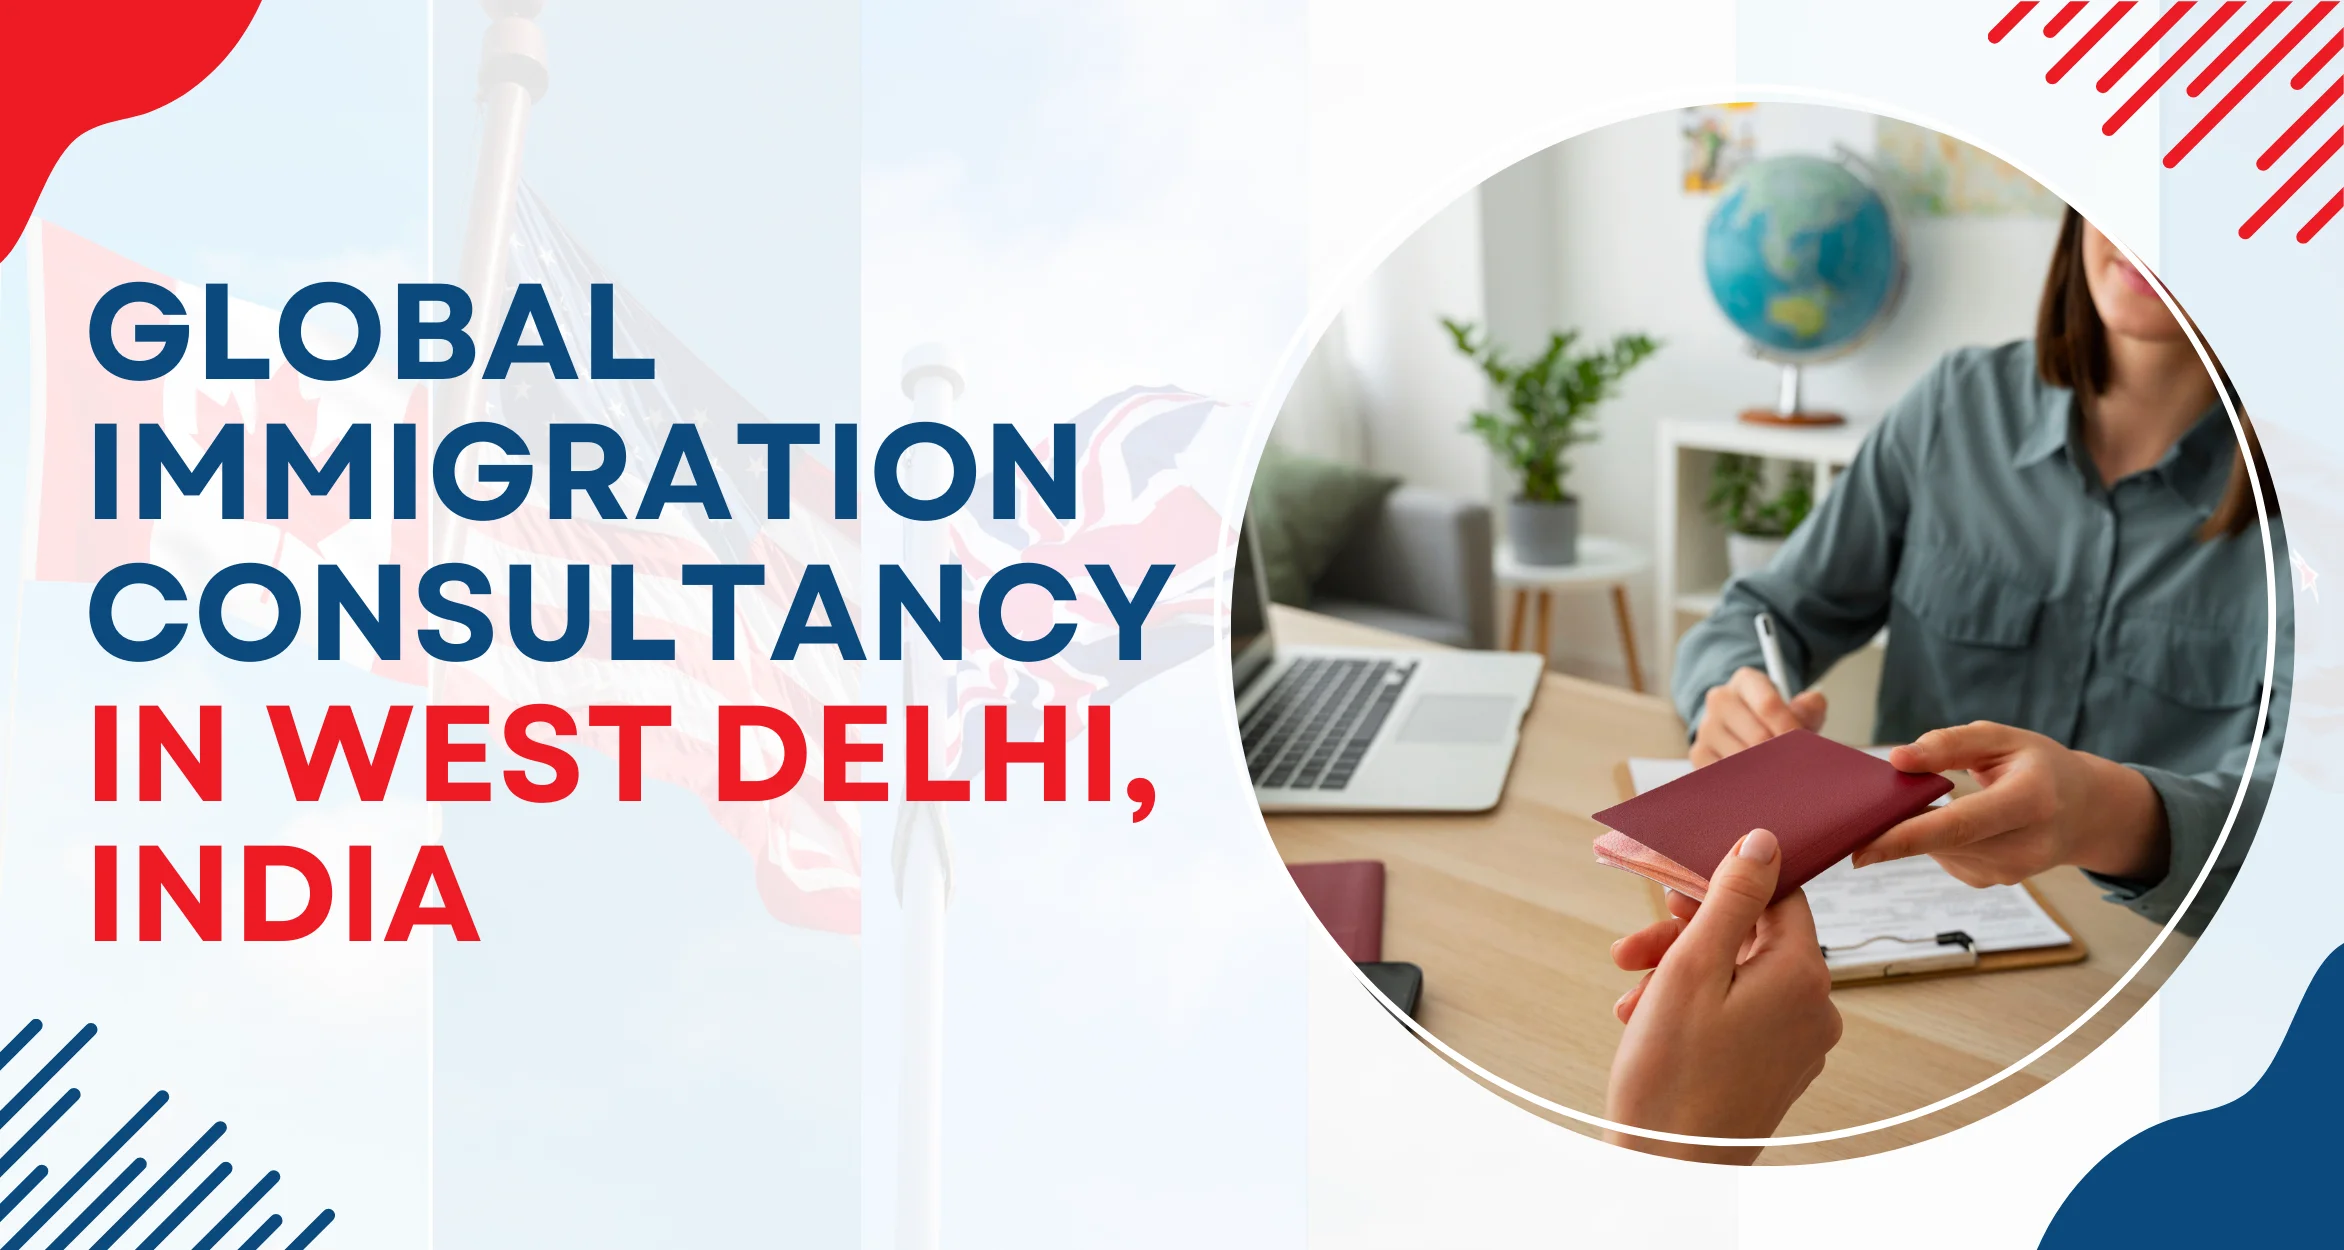 Global immigration consultancy in West Delhi, India